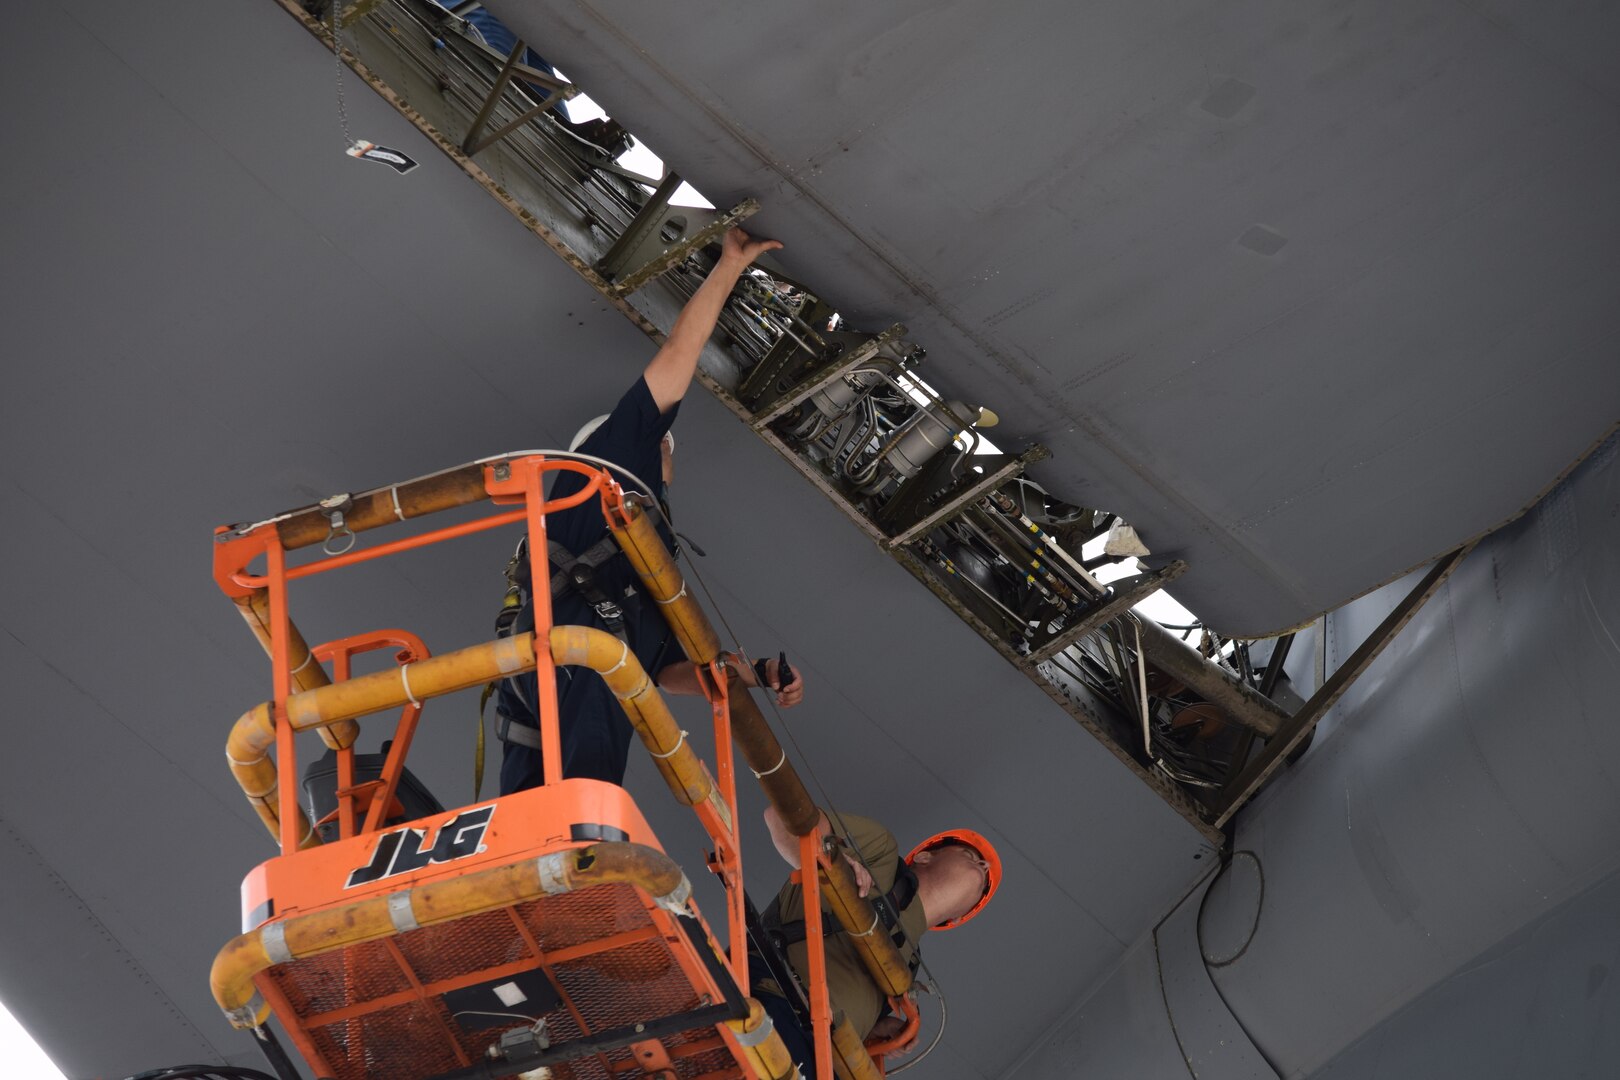 Staff Sgt. Reed Wilson and Senior Airman Justin Dunn, 433rd Airlift Wing aircraft maintainers, monitor a C-5M Super Galaxy elevator as it is being reinstalled onto the aircraft May 27, 2021 at Joint Base San Antonio-Lackland, Texas. The elevator was removed to allow repair of a crack on the aircraft’s hull. (Air Force photo by Tech. Sgt. Iram Carmona)